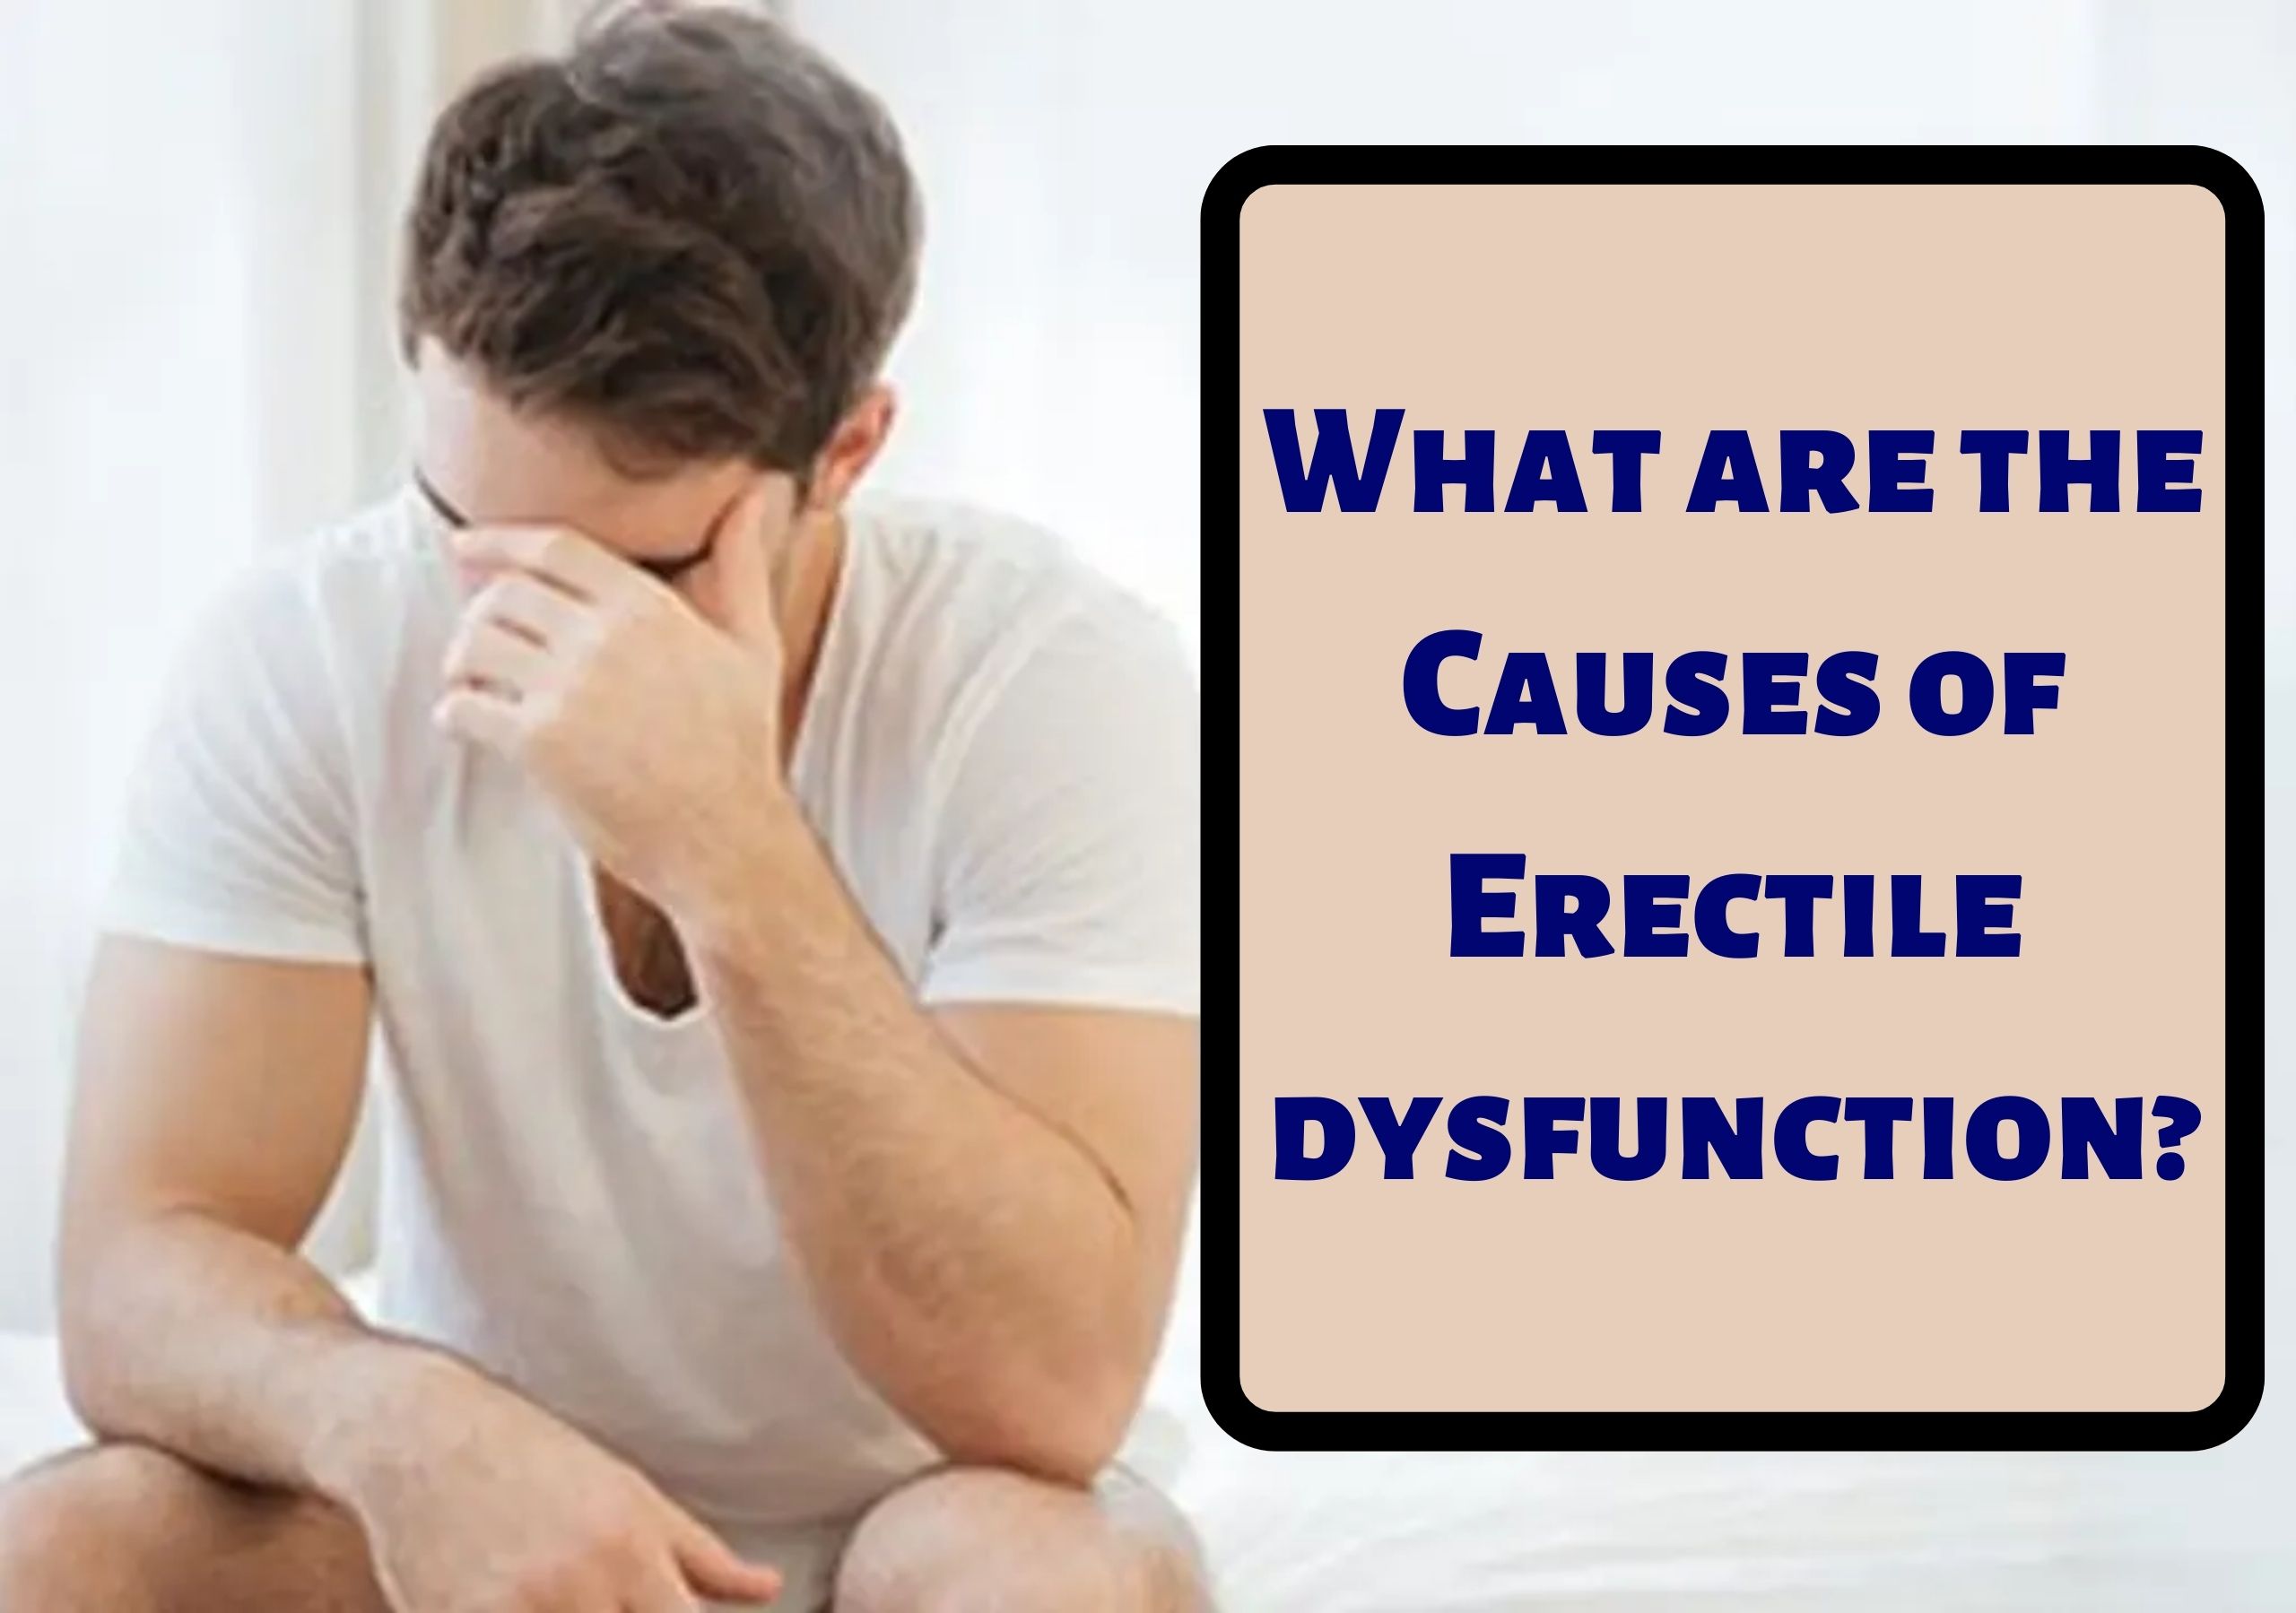 Causes of Erectile Dysfunction | Urolife Clinic